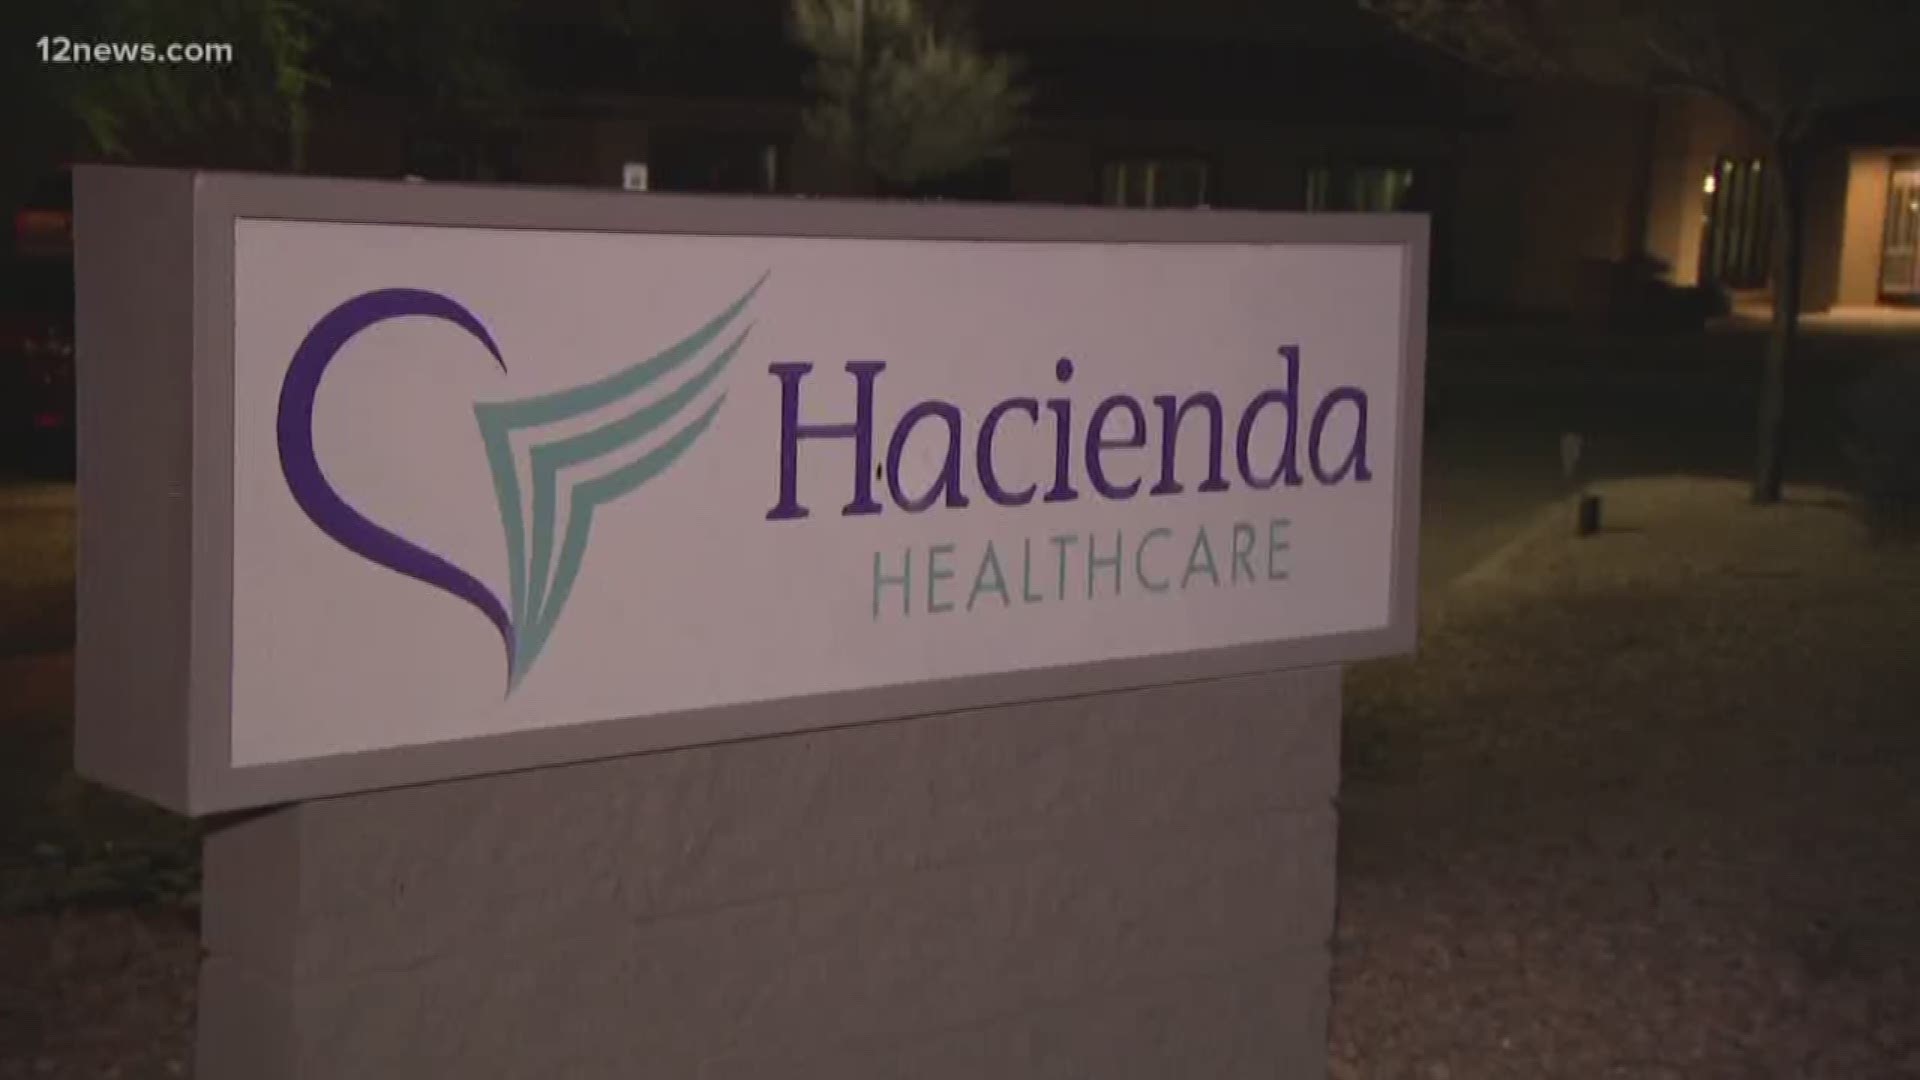 Hacienda Healthcare has become known as the facility where an incapacitated woman gave birth in December, but issues at the facility are much deeper. 12 News' I-Team takes a look at Hacienda's past.